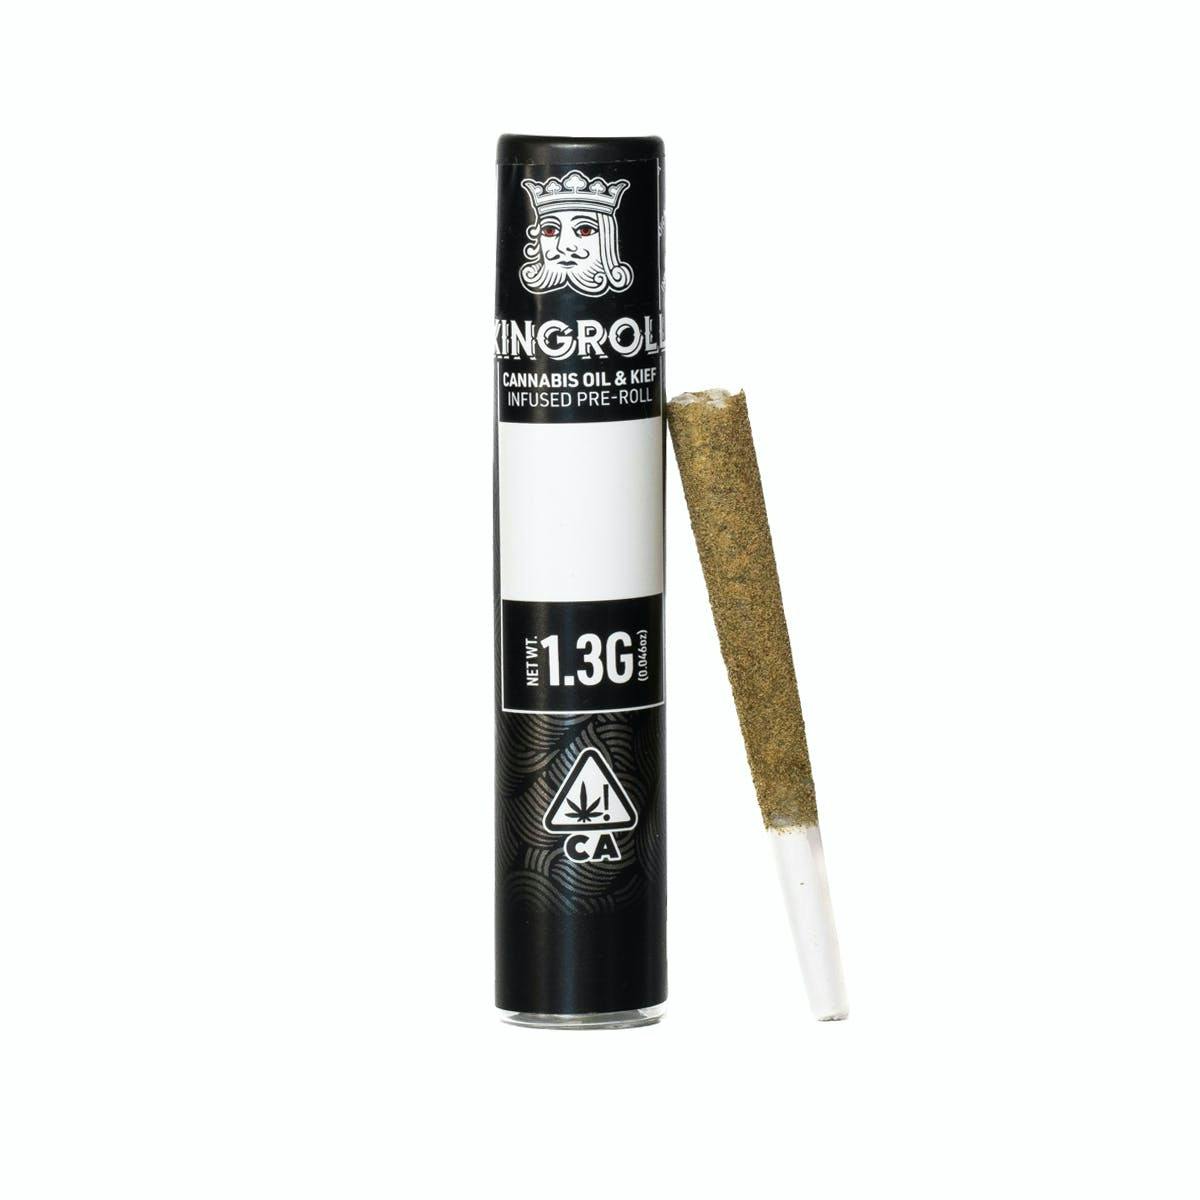 Blueberry Pancakes X Blueberry Z Infused Pre-Roll | 1.3g | Torrey 